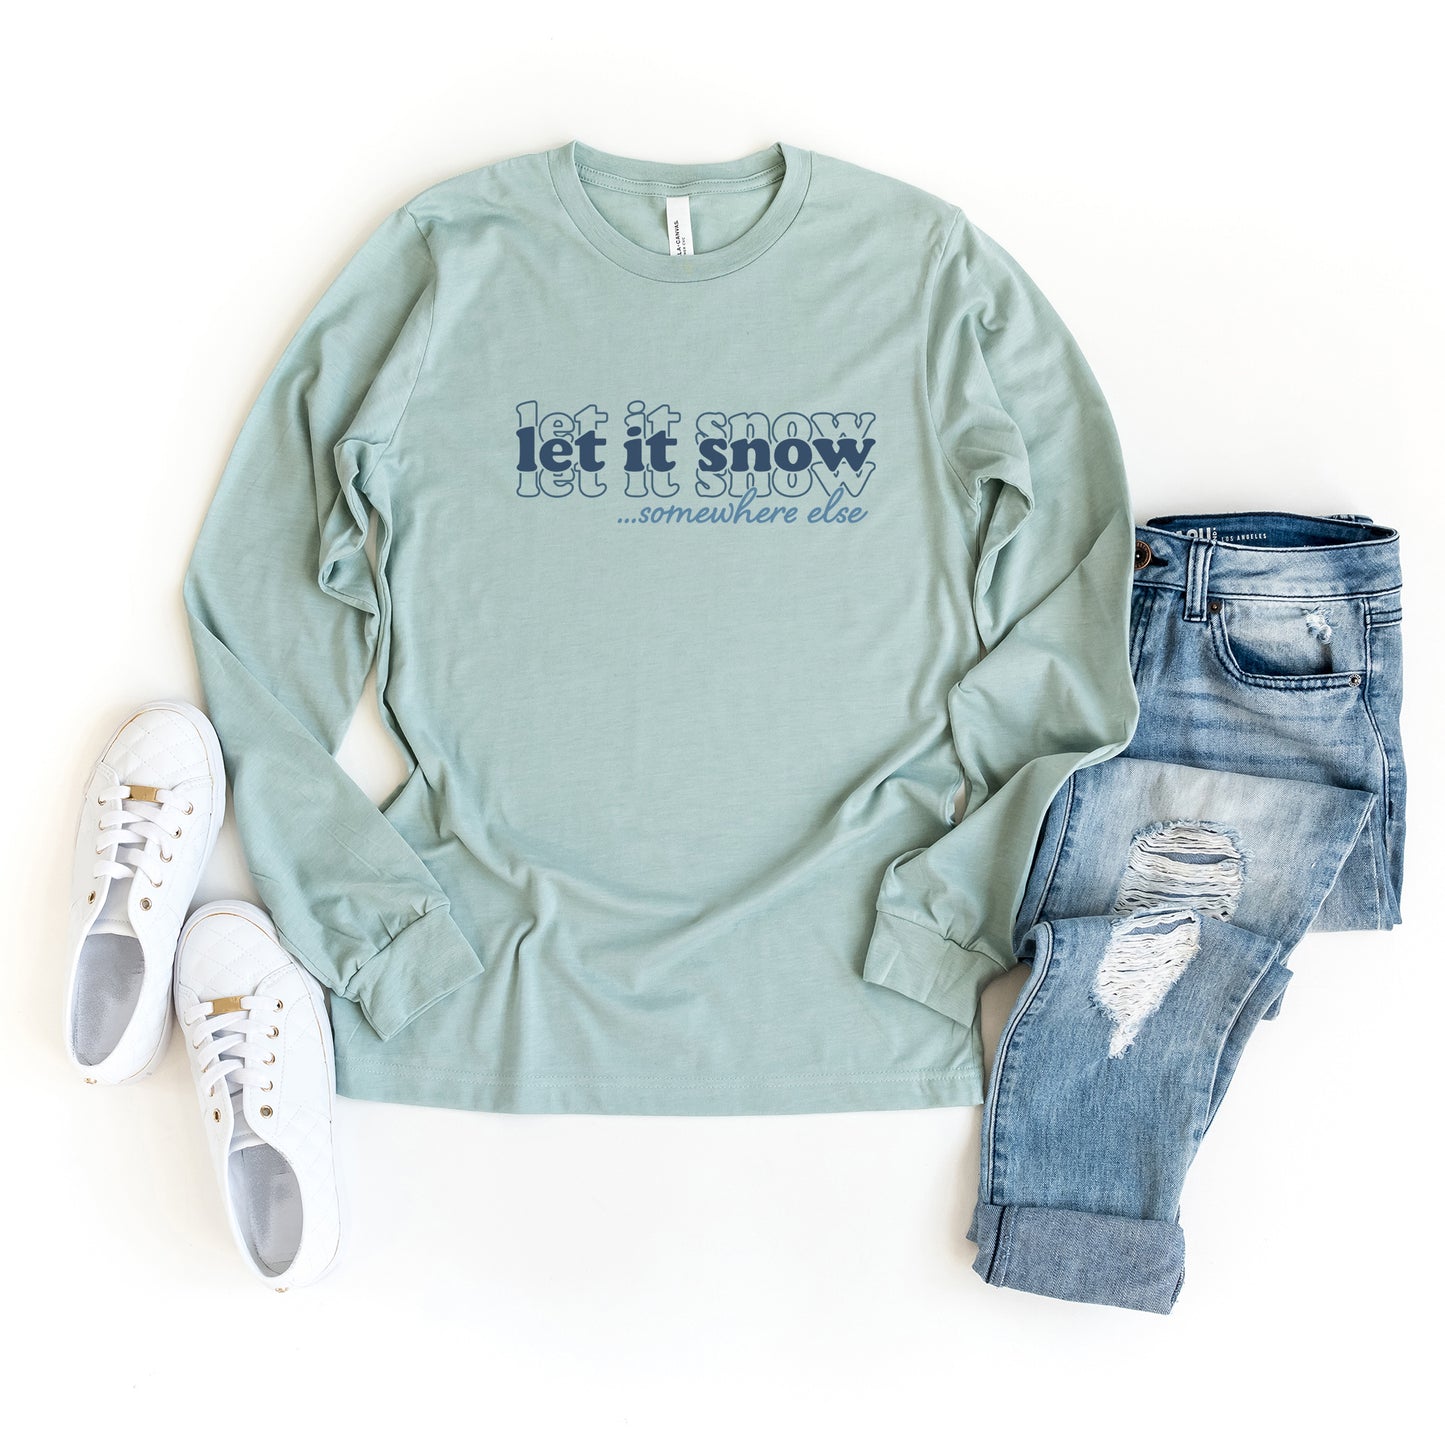 Let It Snow Somewhere Else Stacked | Long Sleeve Graphic Tee